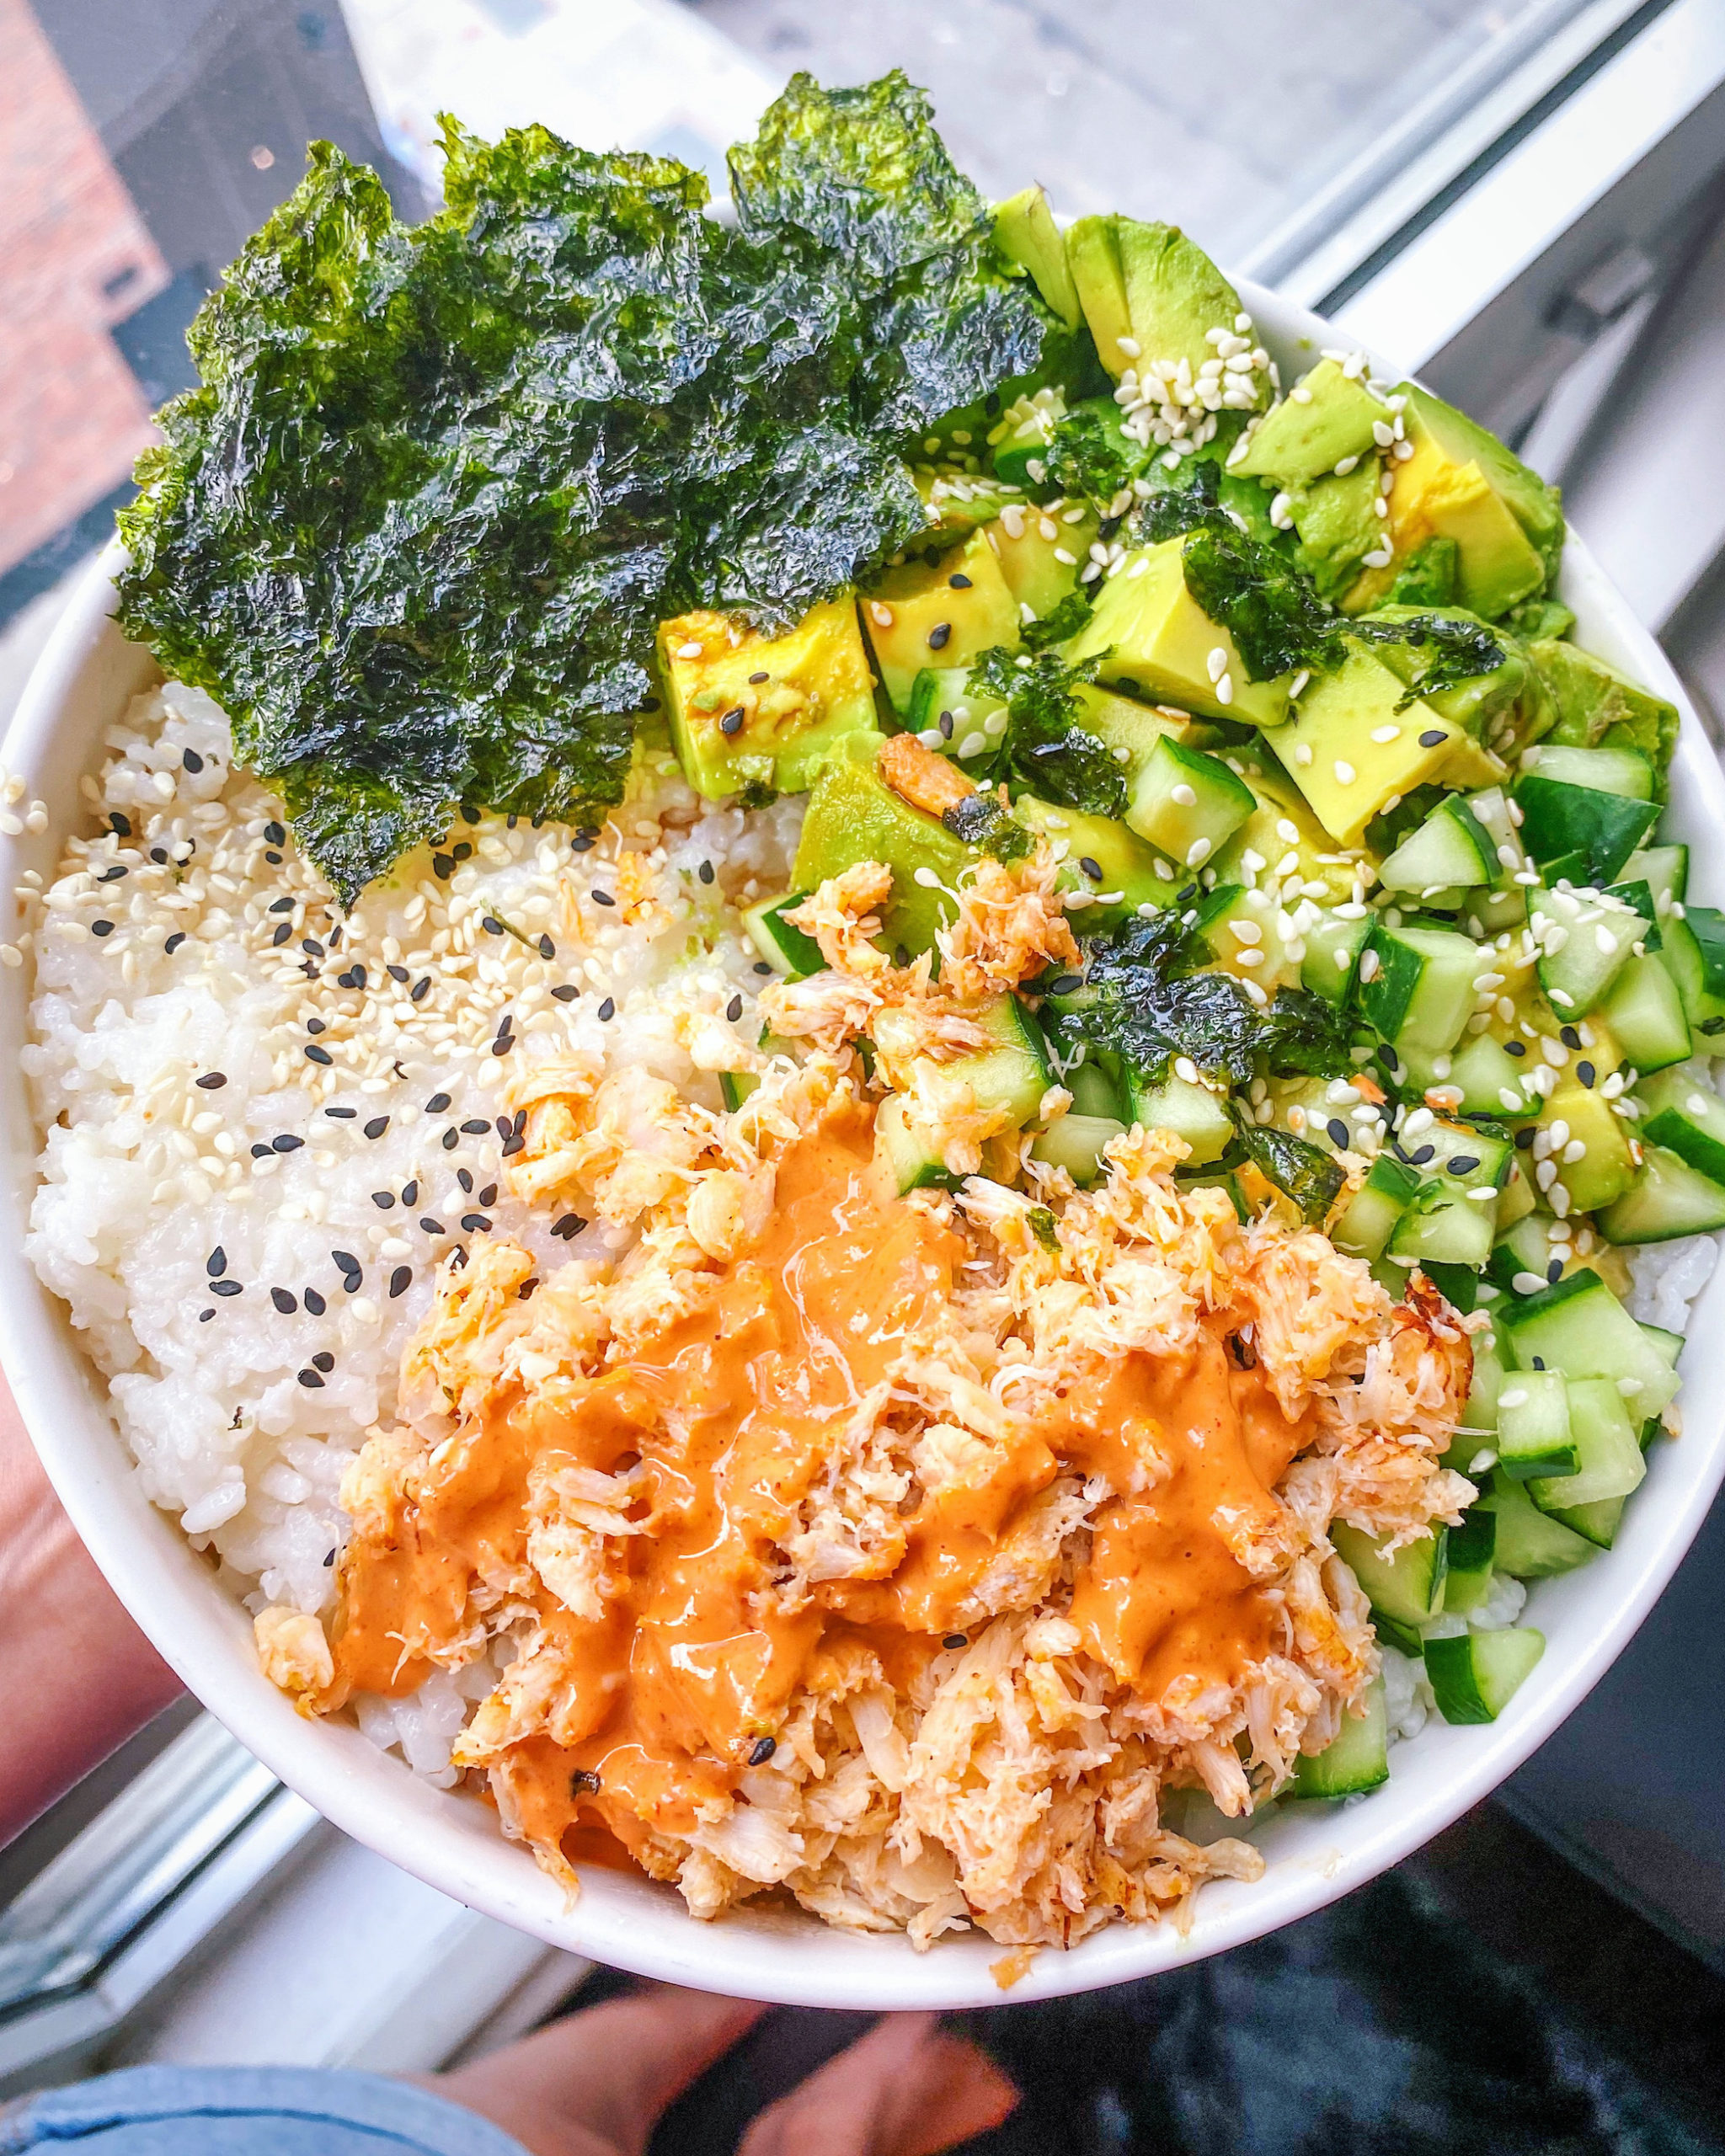 California roll poke bowl with avocado, cucumber, spicy mayo and seaweed